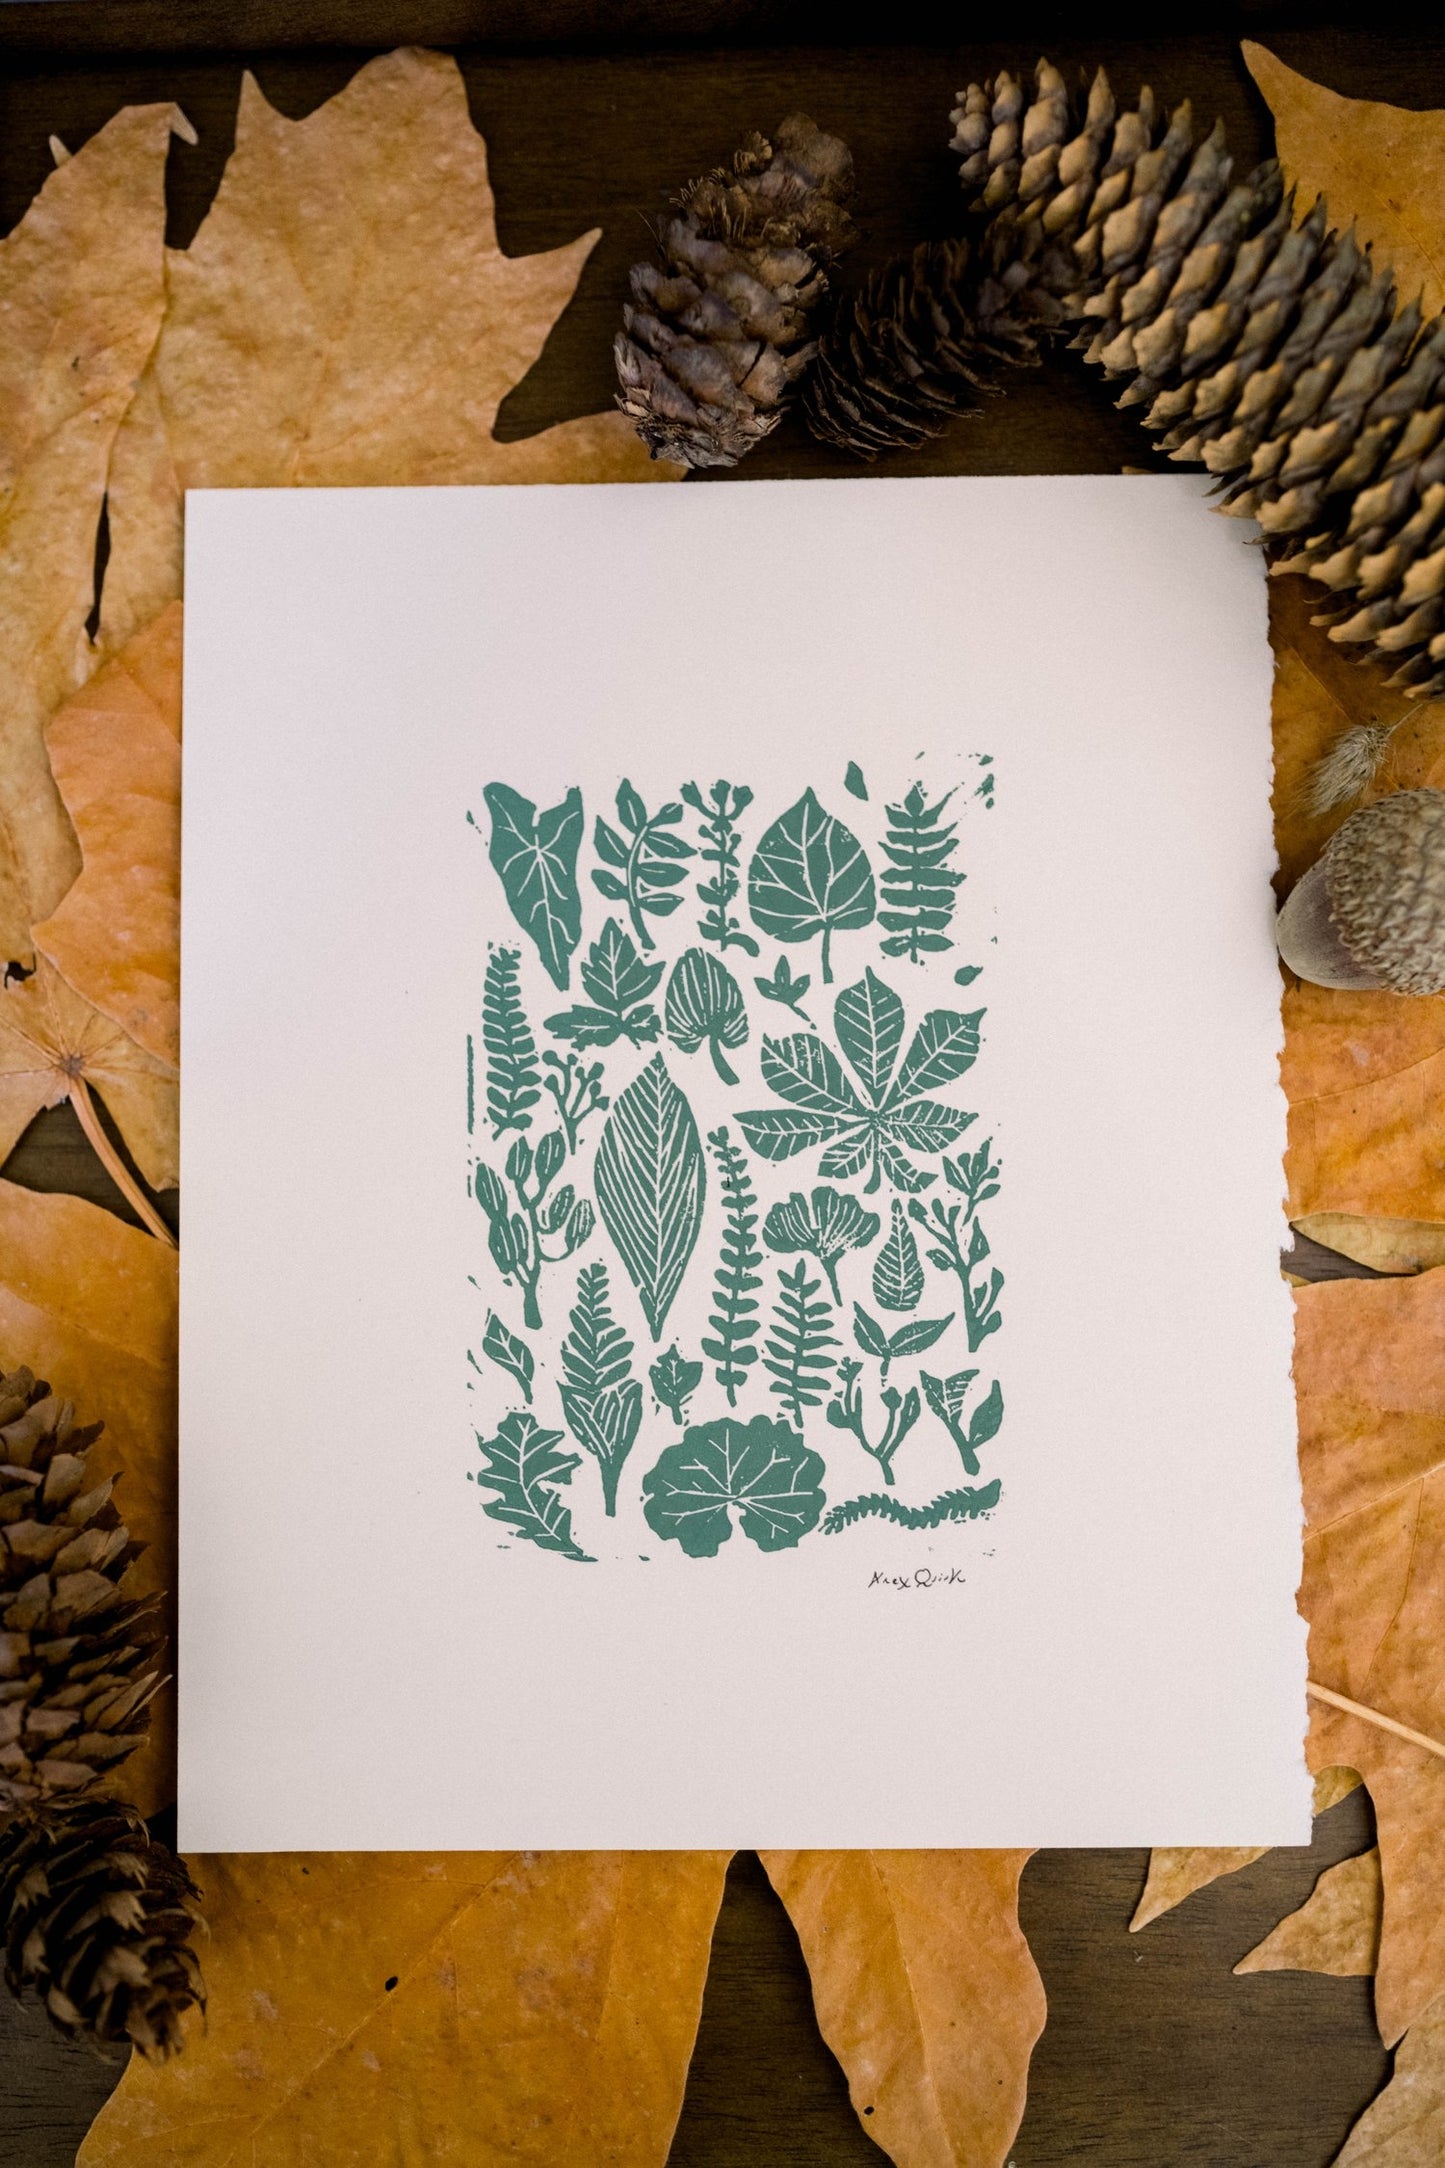 Woodland Prints by Works of a Quirk (8”x10”)